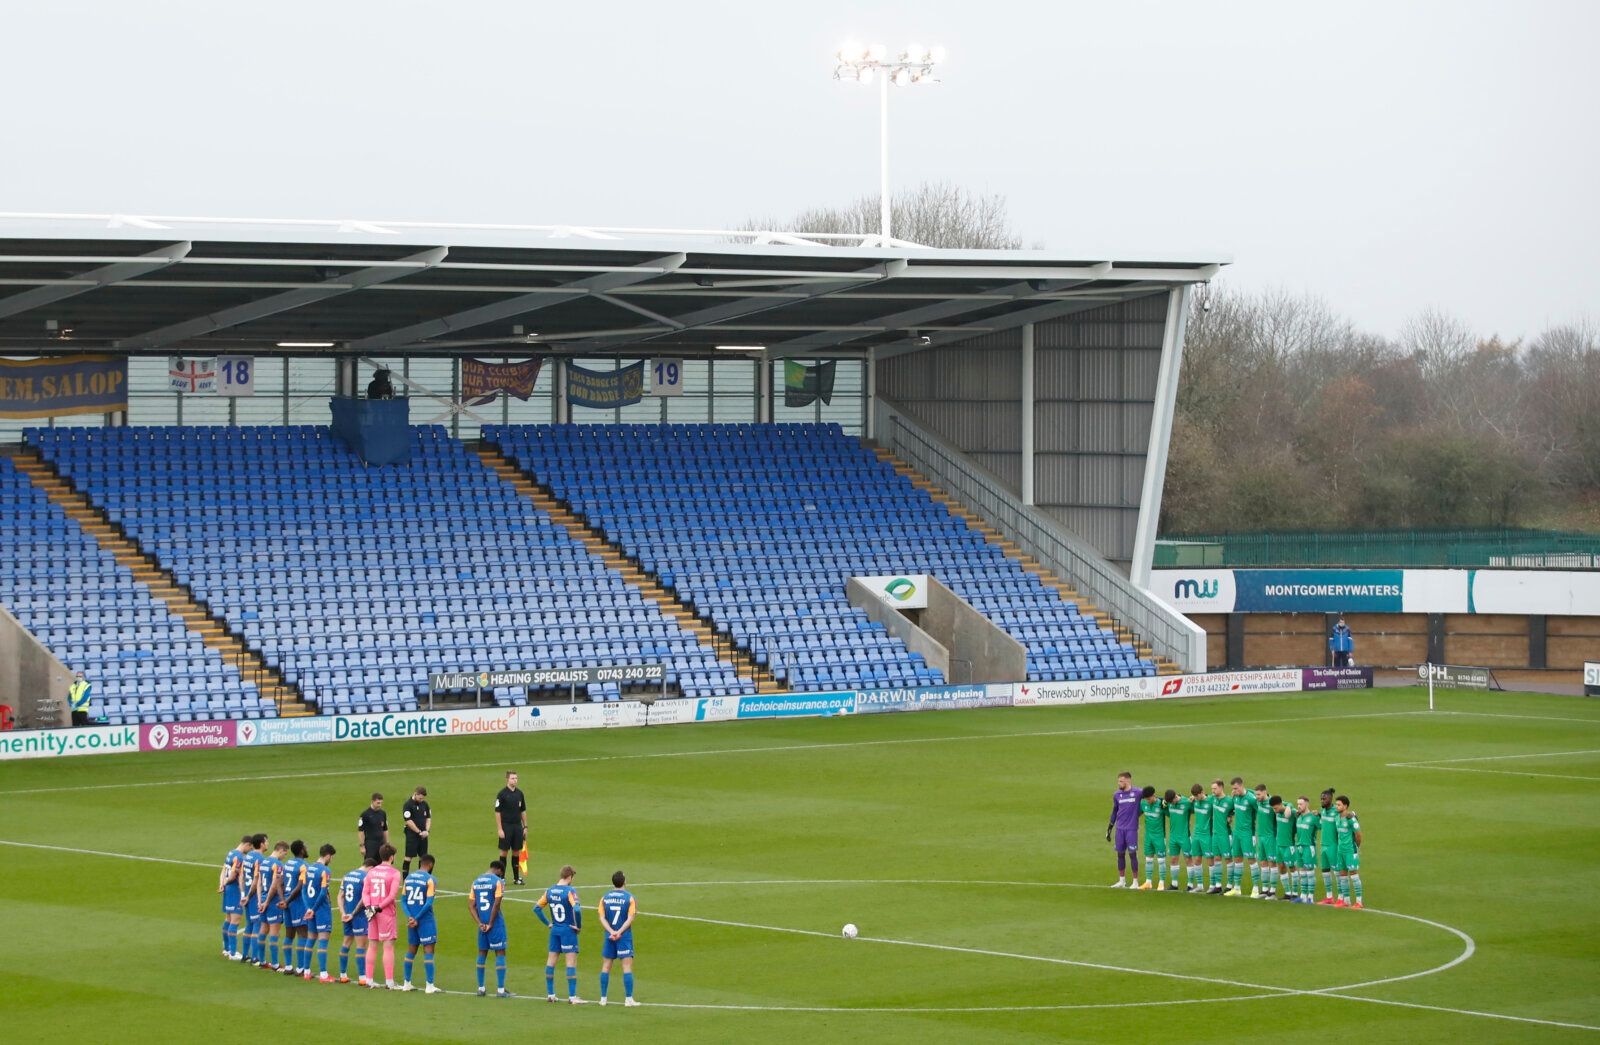 Soccer Football - FA Cup Second Round - Shrewsbury Town v Oxford City - Montgomery Waters Meadow, Shrewsbury, Britain - November 29, 2020 General view of the teams during a minute's silence in memory of Diego Maradona before the match Action Images/Andrew Boyers EDITORIAL USE ONLY. No use with unauthorized audio, video, data, fixture lists, club/league logos or 'live' services. Online in-match use limited to 75 images, no video emulation. No use in betting, games or single club /league/player pu